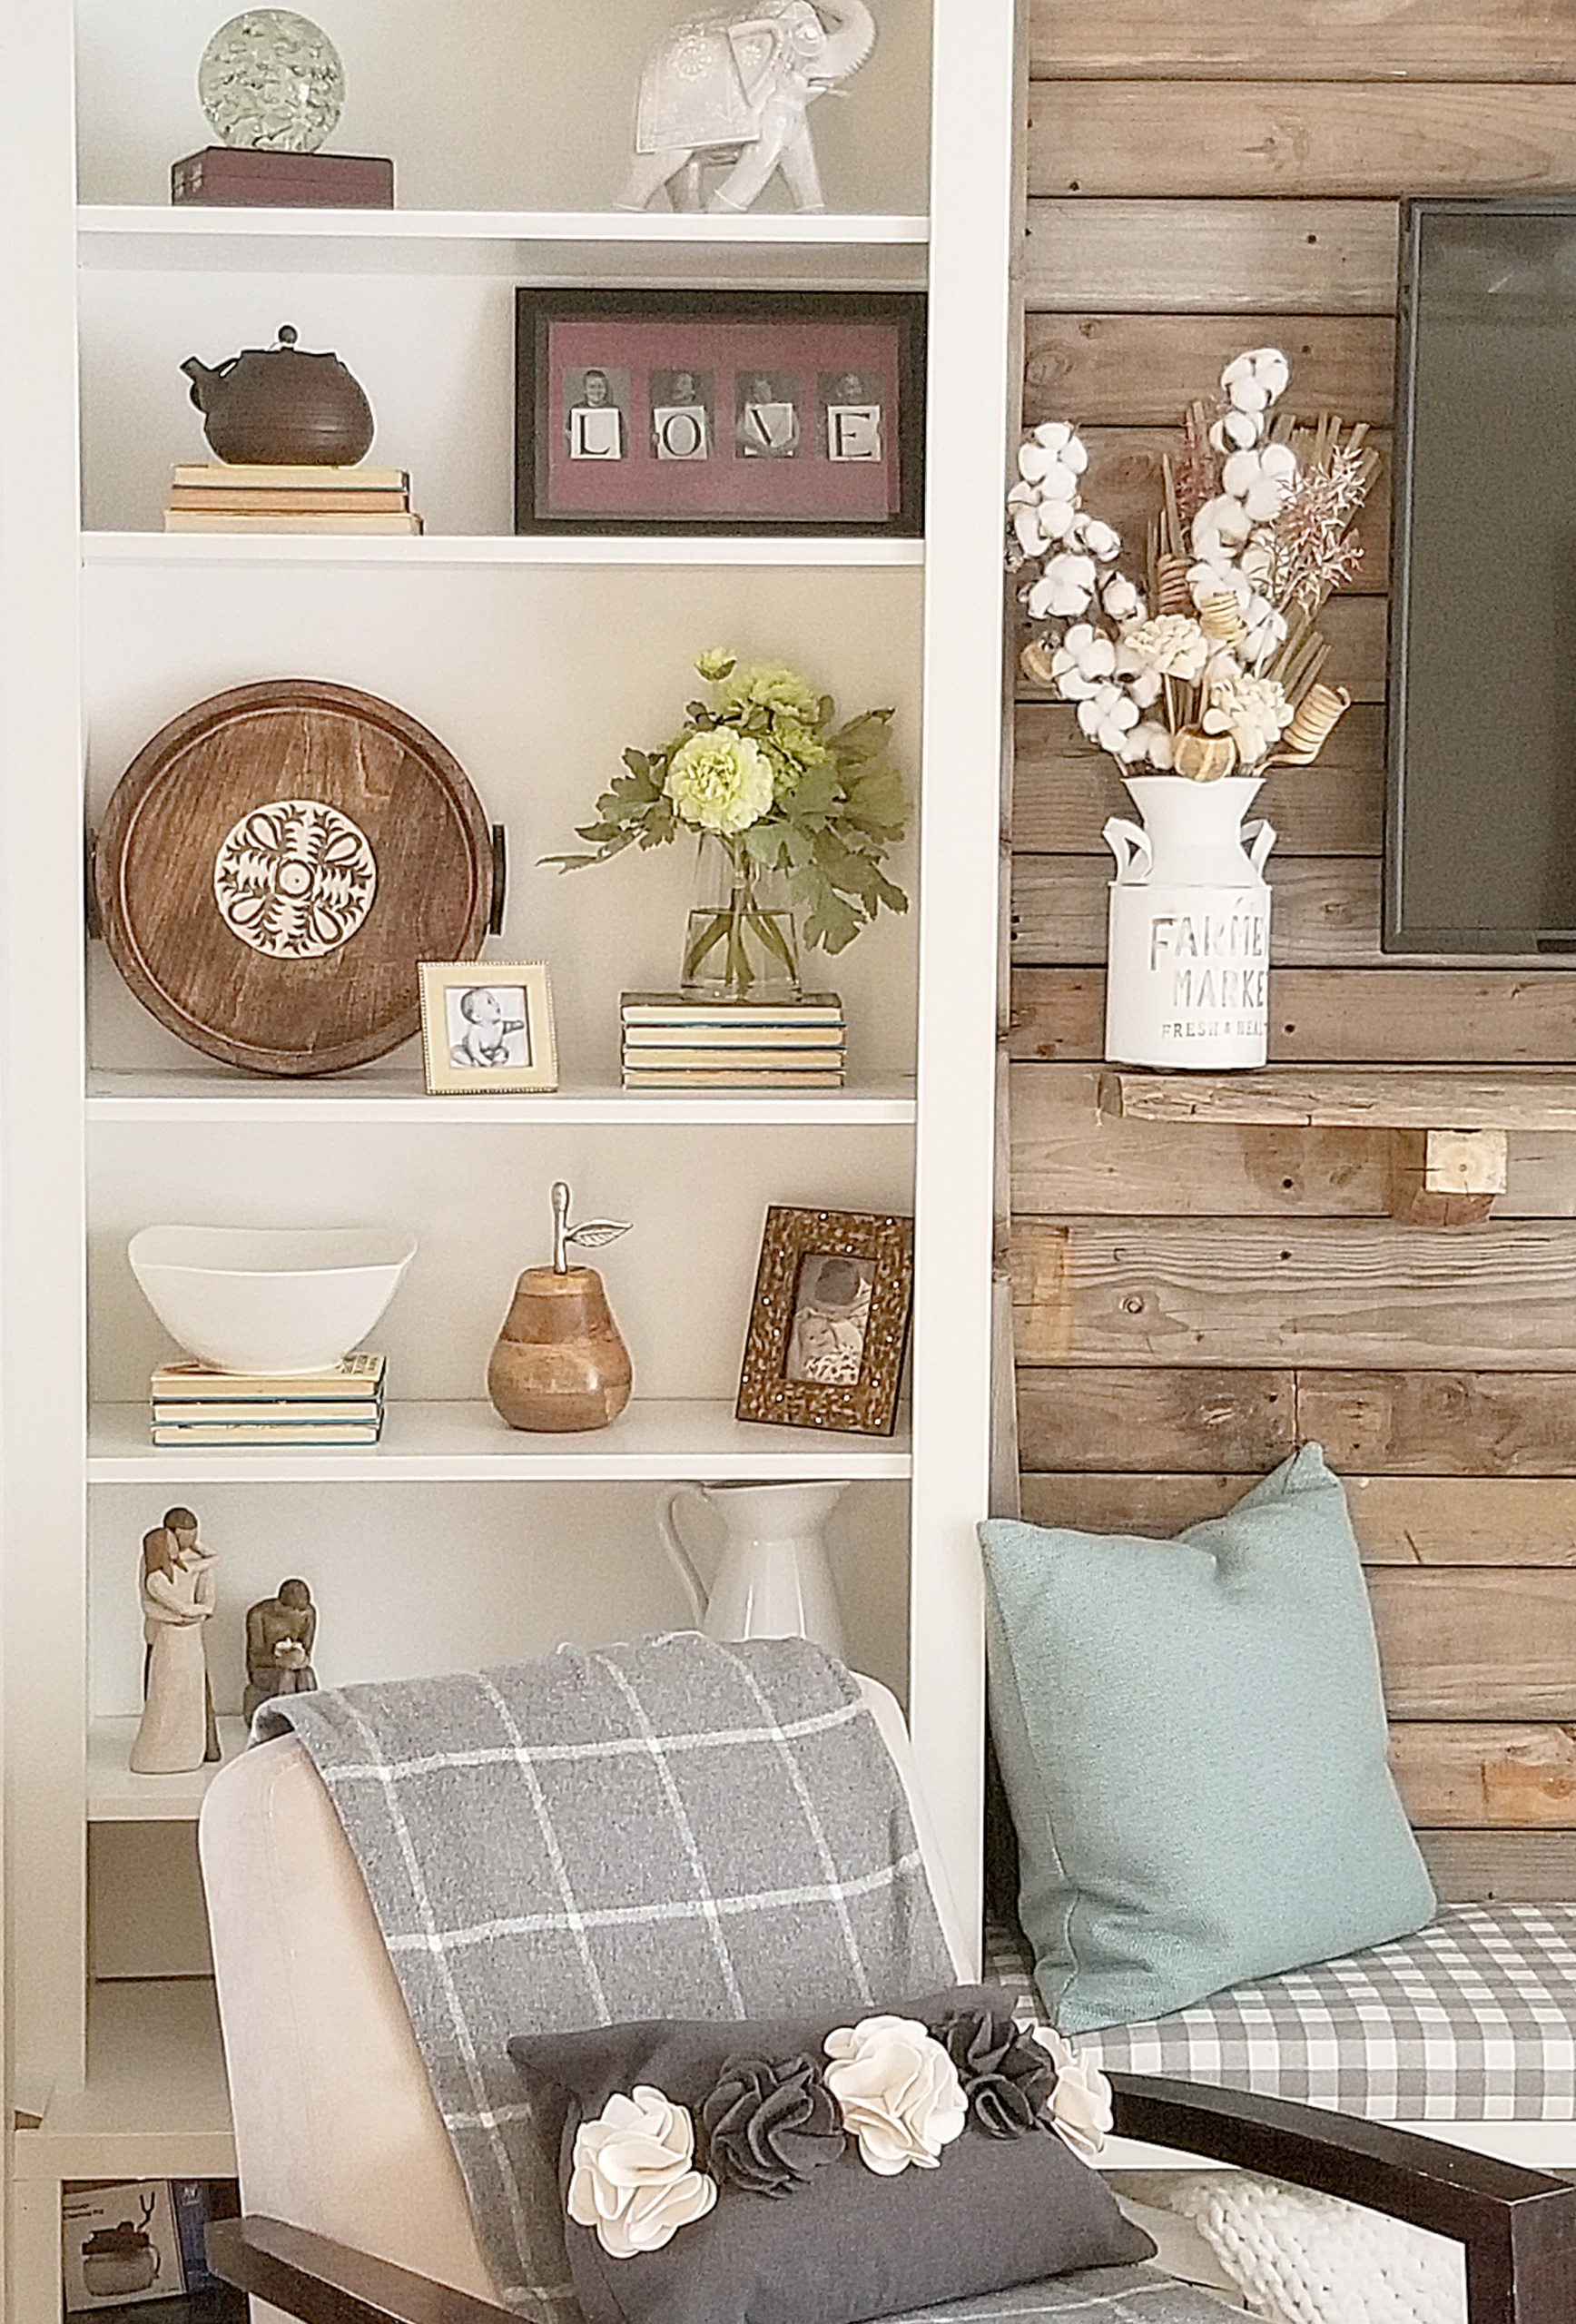 6 Tips on how to decorate bookcases on a budget